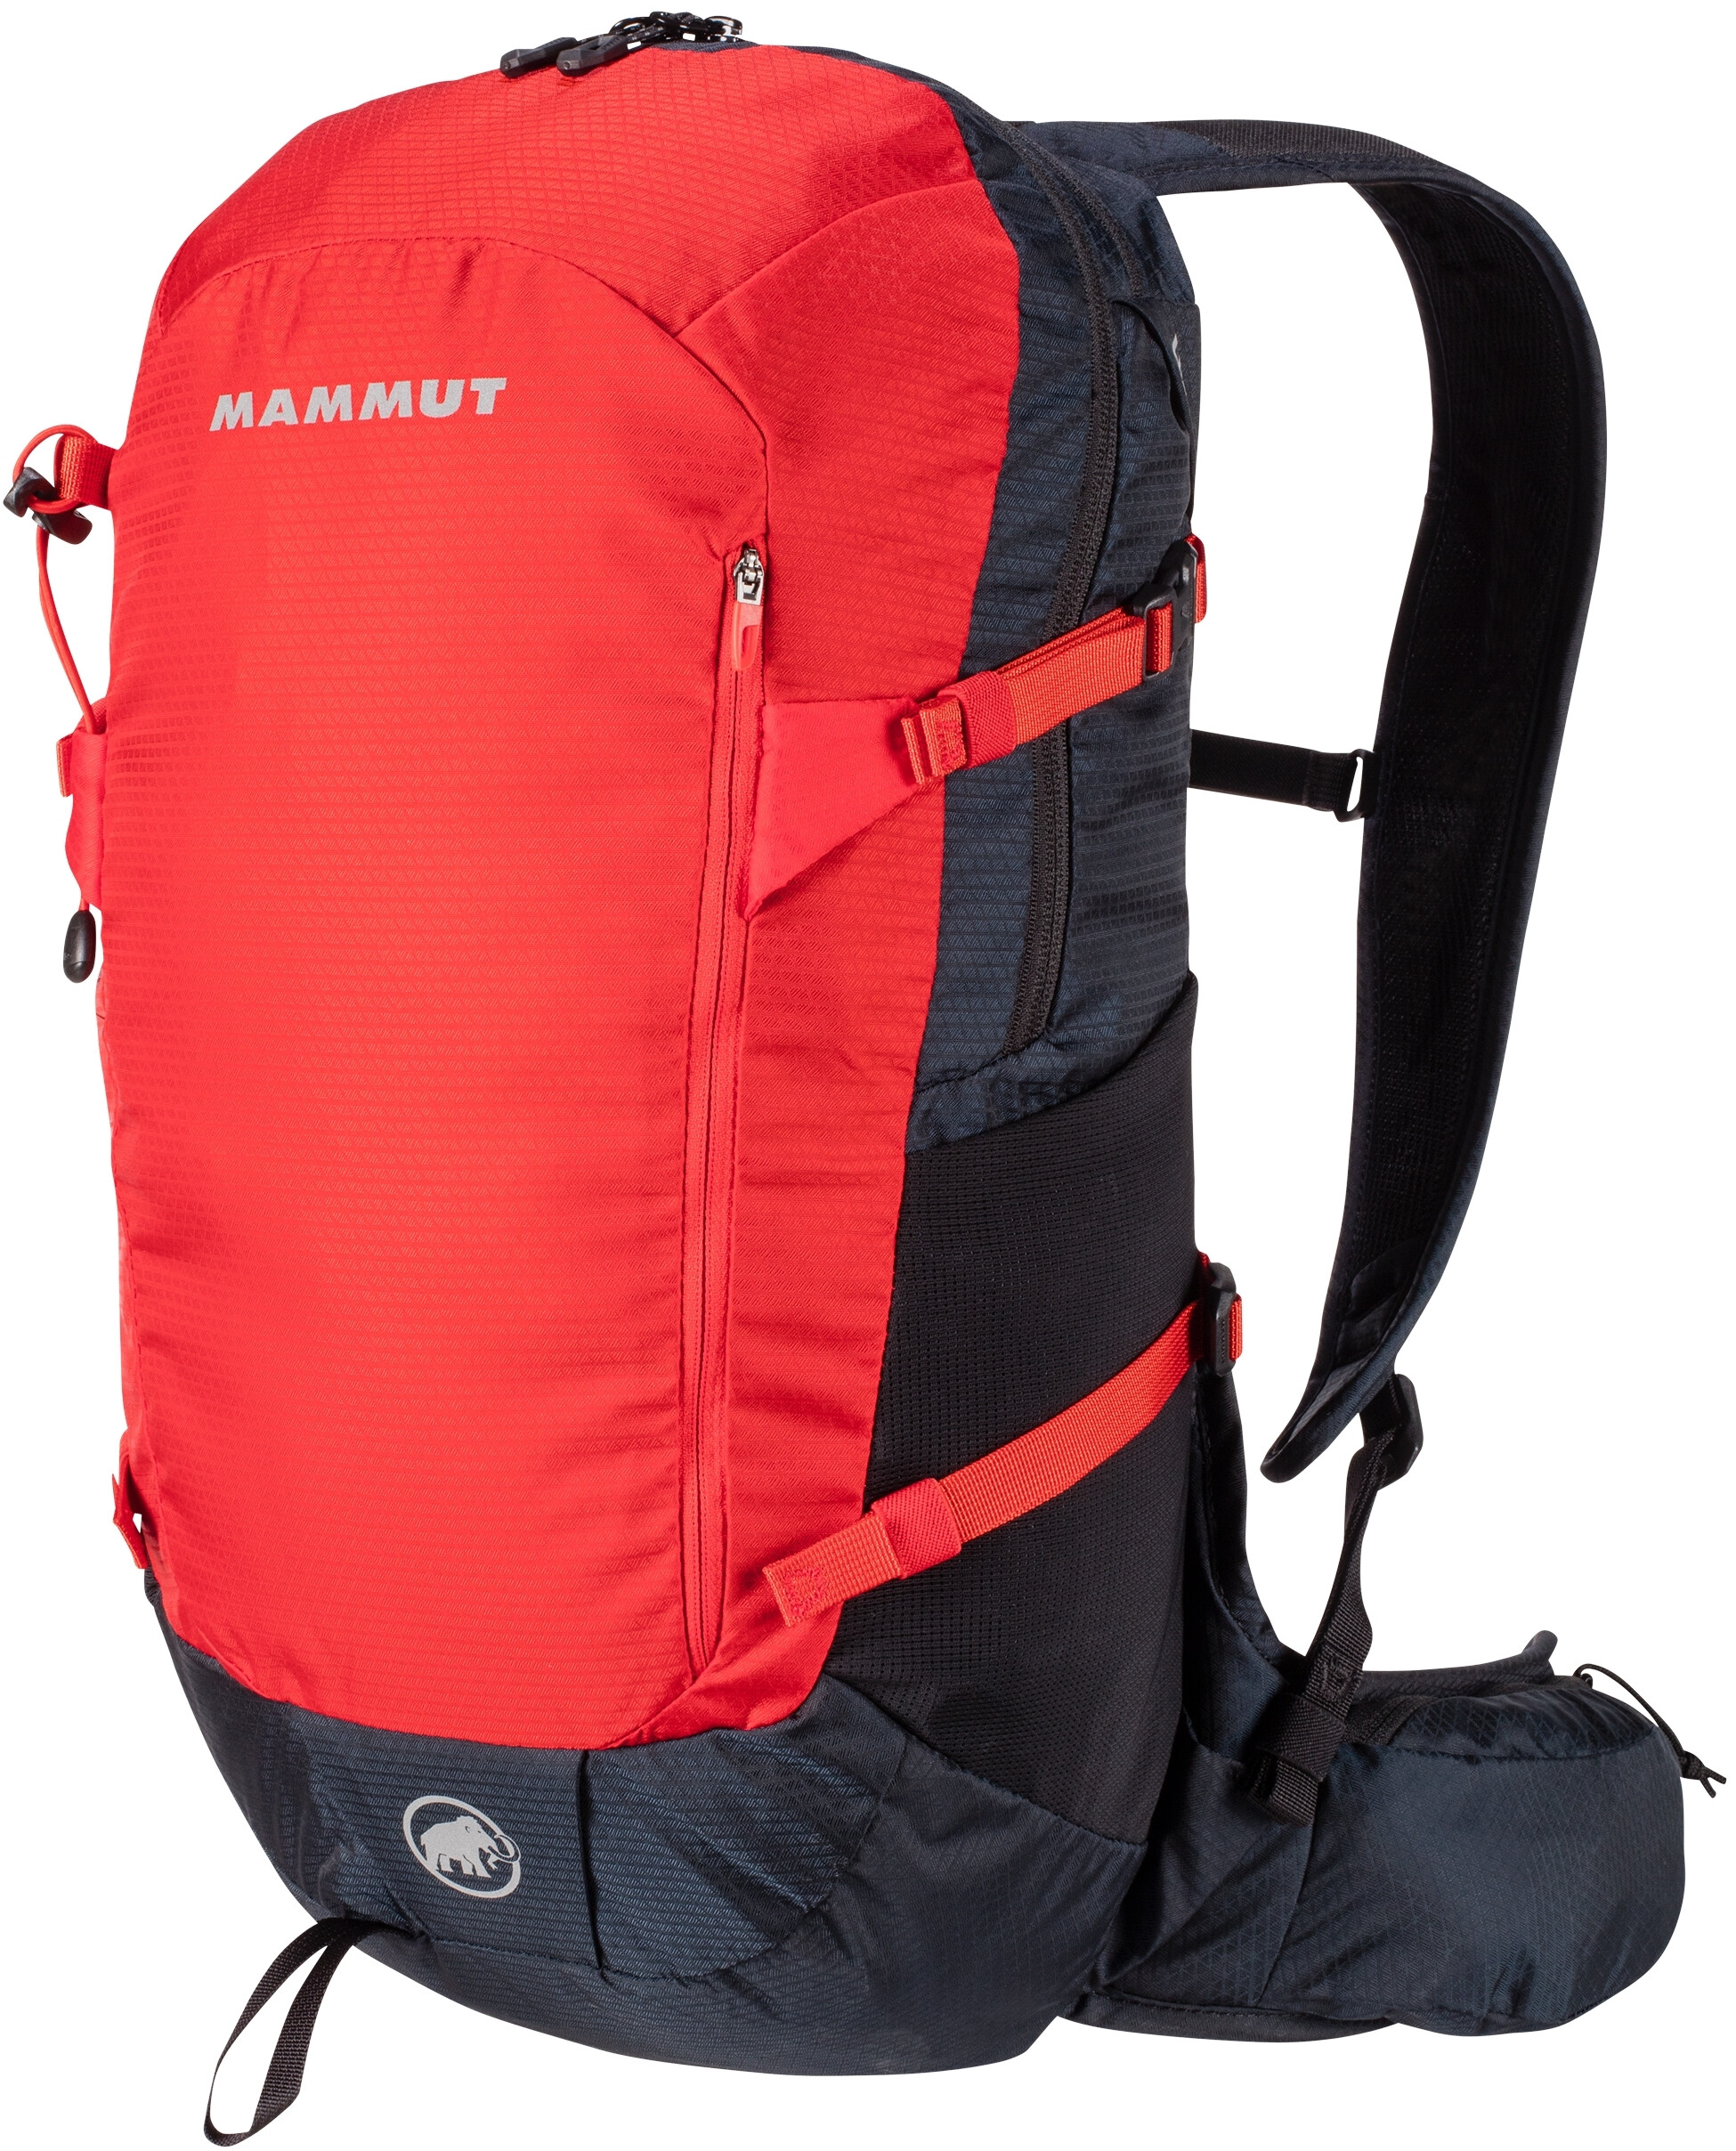 Mammut Lithium Speed 20 Backpack spicy/black | Addnature.co.uk